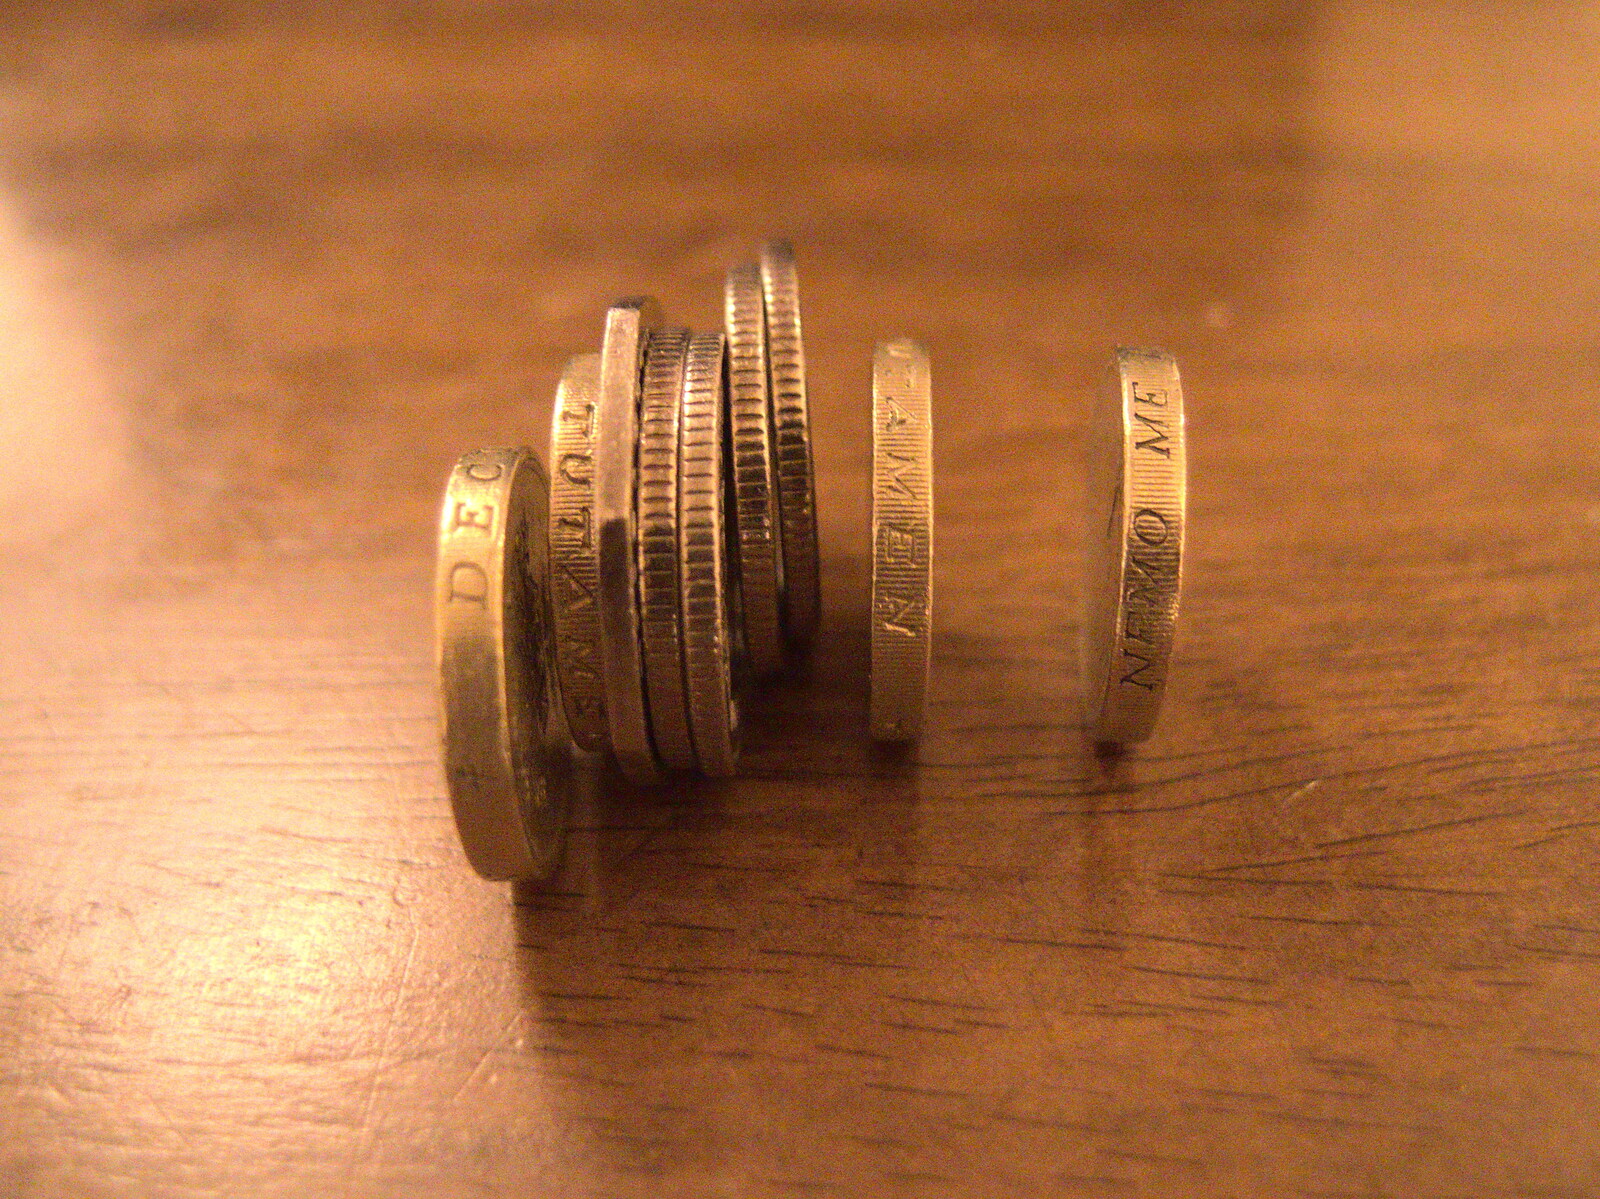 A stack of coins from New Year's Eve, The Oaksmere, Brome, Suffolk - 31st December 2016